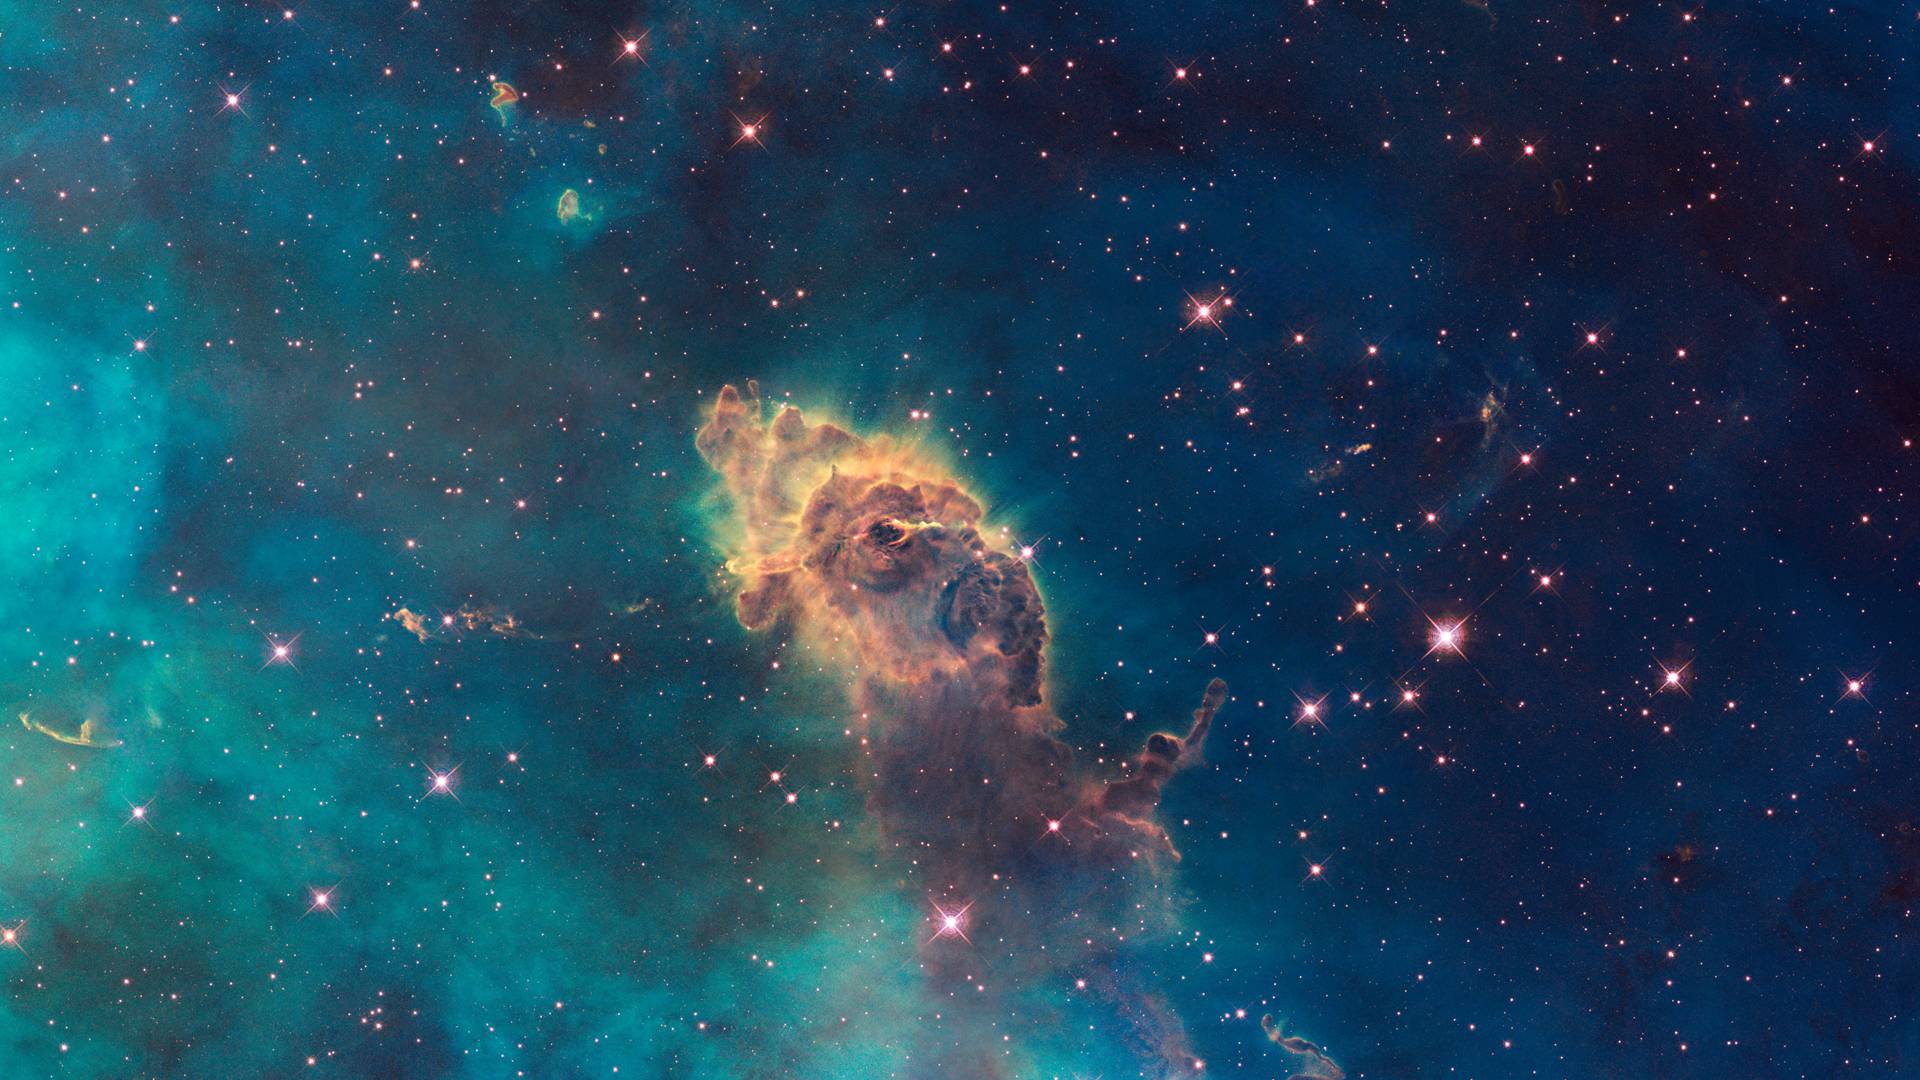 Space stars nebula gas wallpaper - (#19907) - High Quality and ...